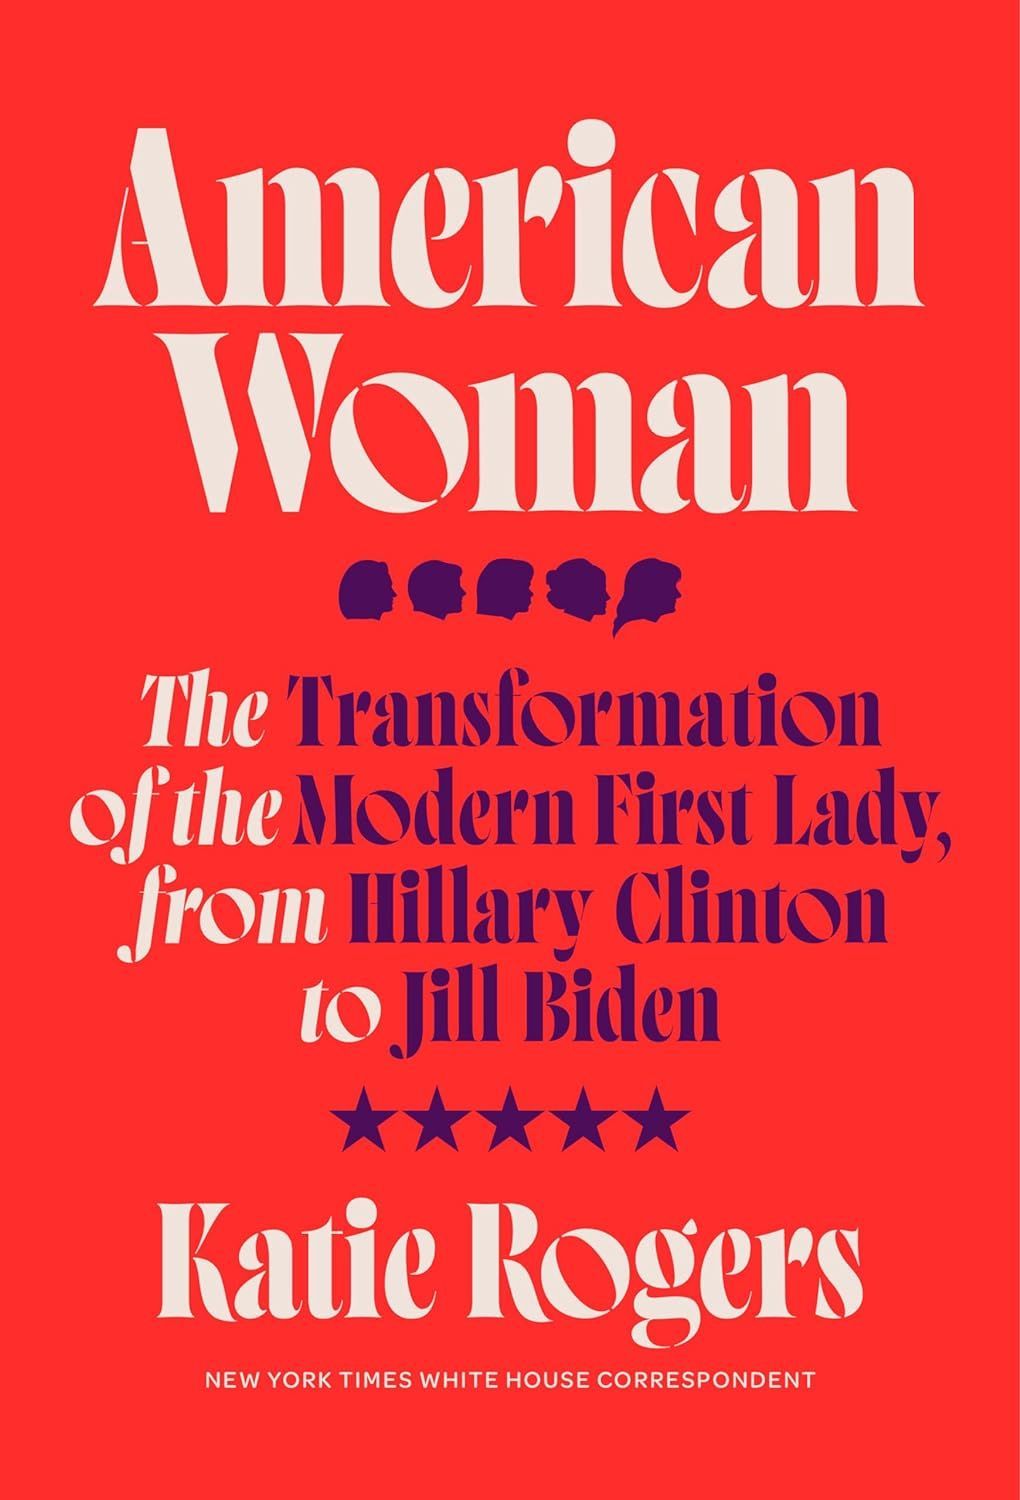 A Host of Demands: On Katie Rogers’s “American Woman”